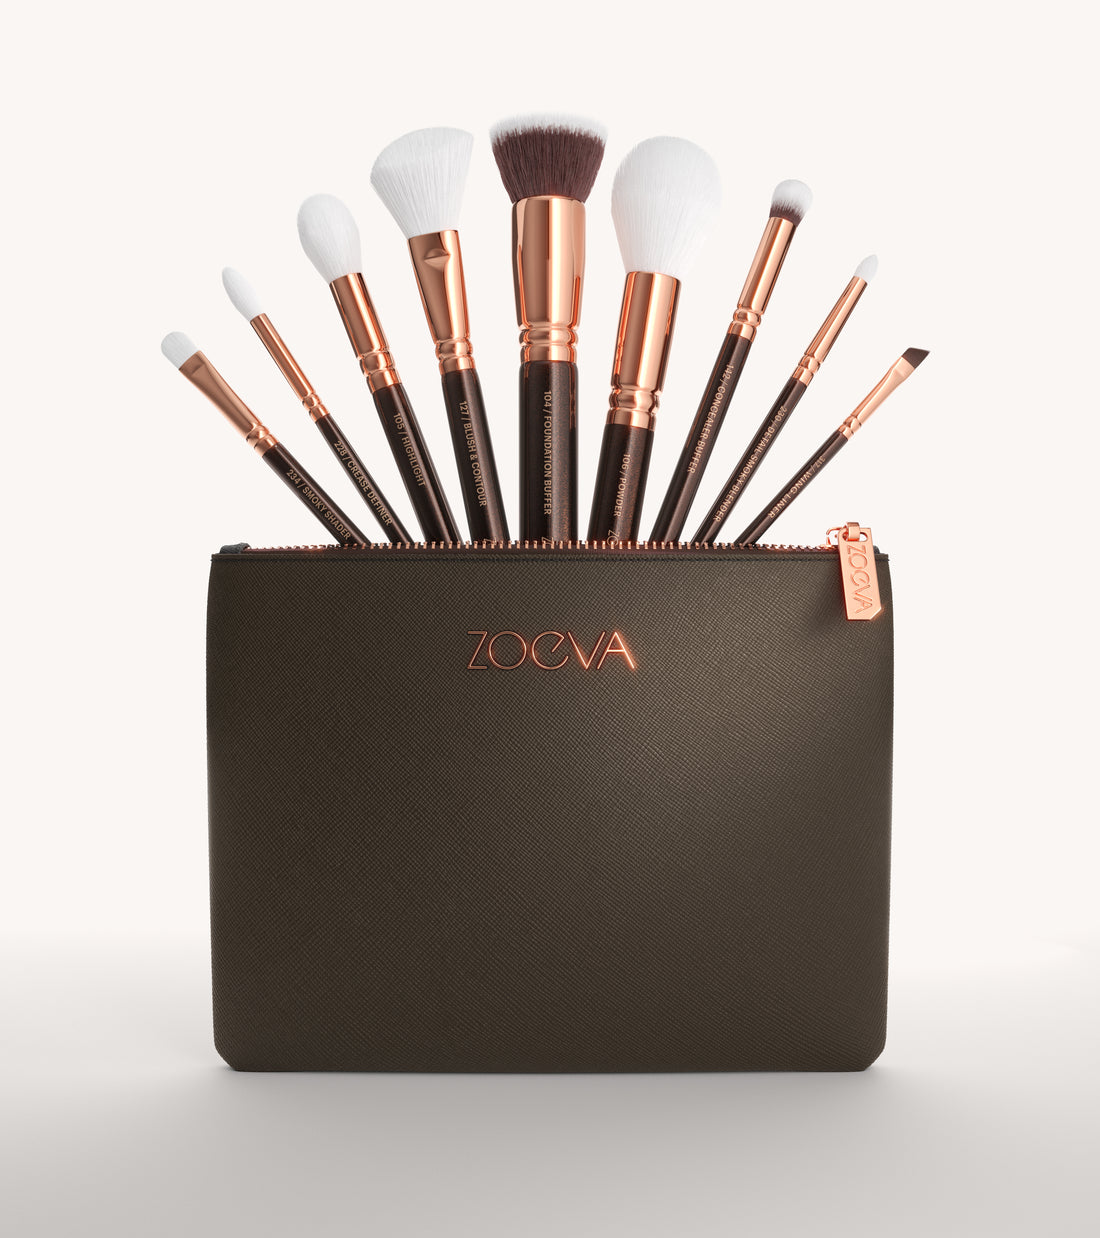 Zoeva Rose Golden Complete Brush Set for Luxe Makeup Application | makeup brushes